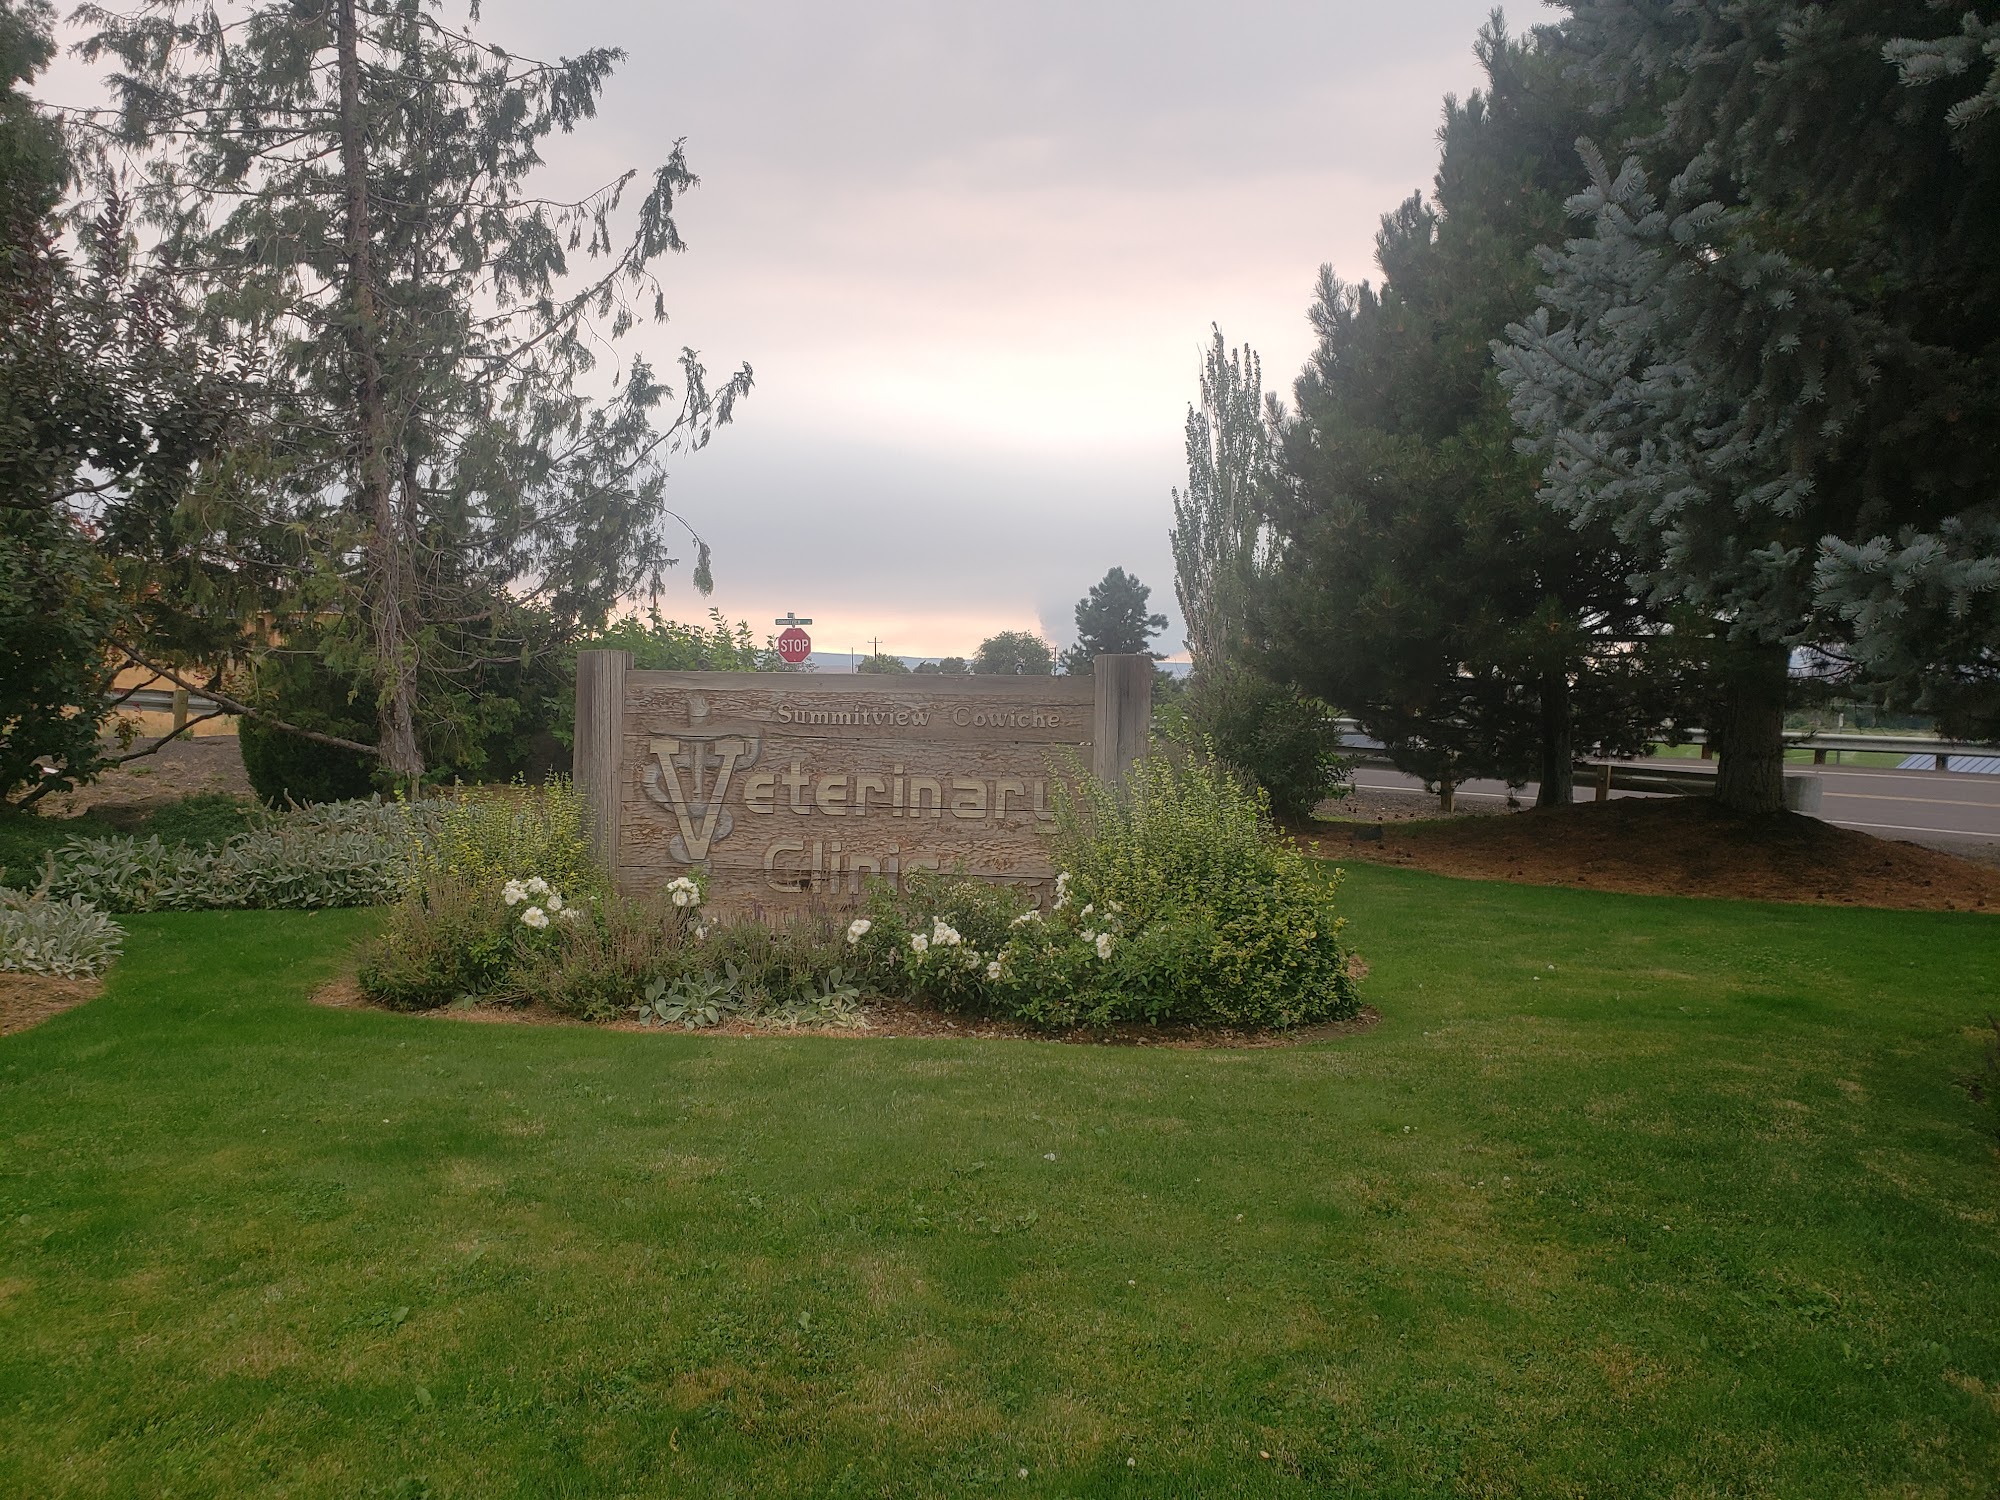 Summitview Cowiche Veterinary Clinic